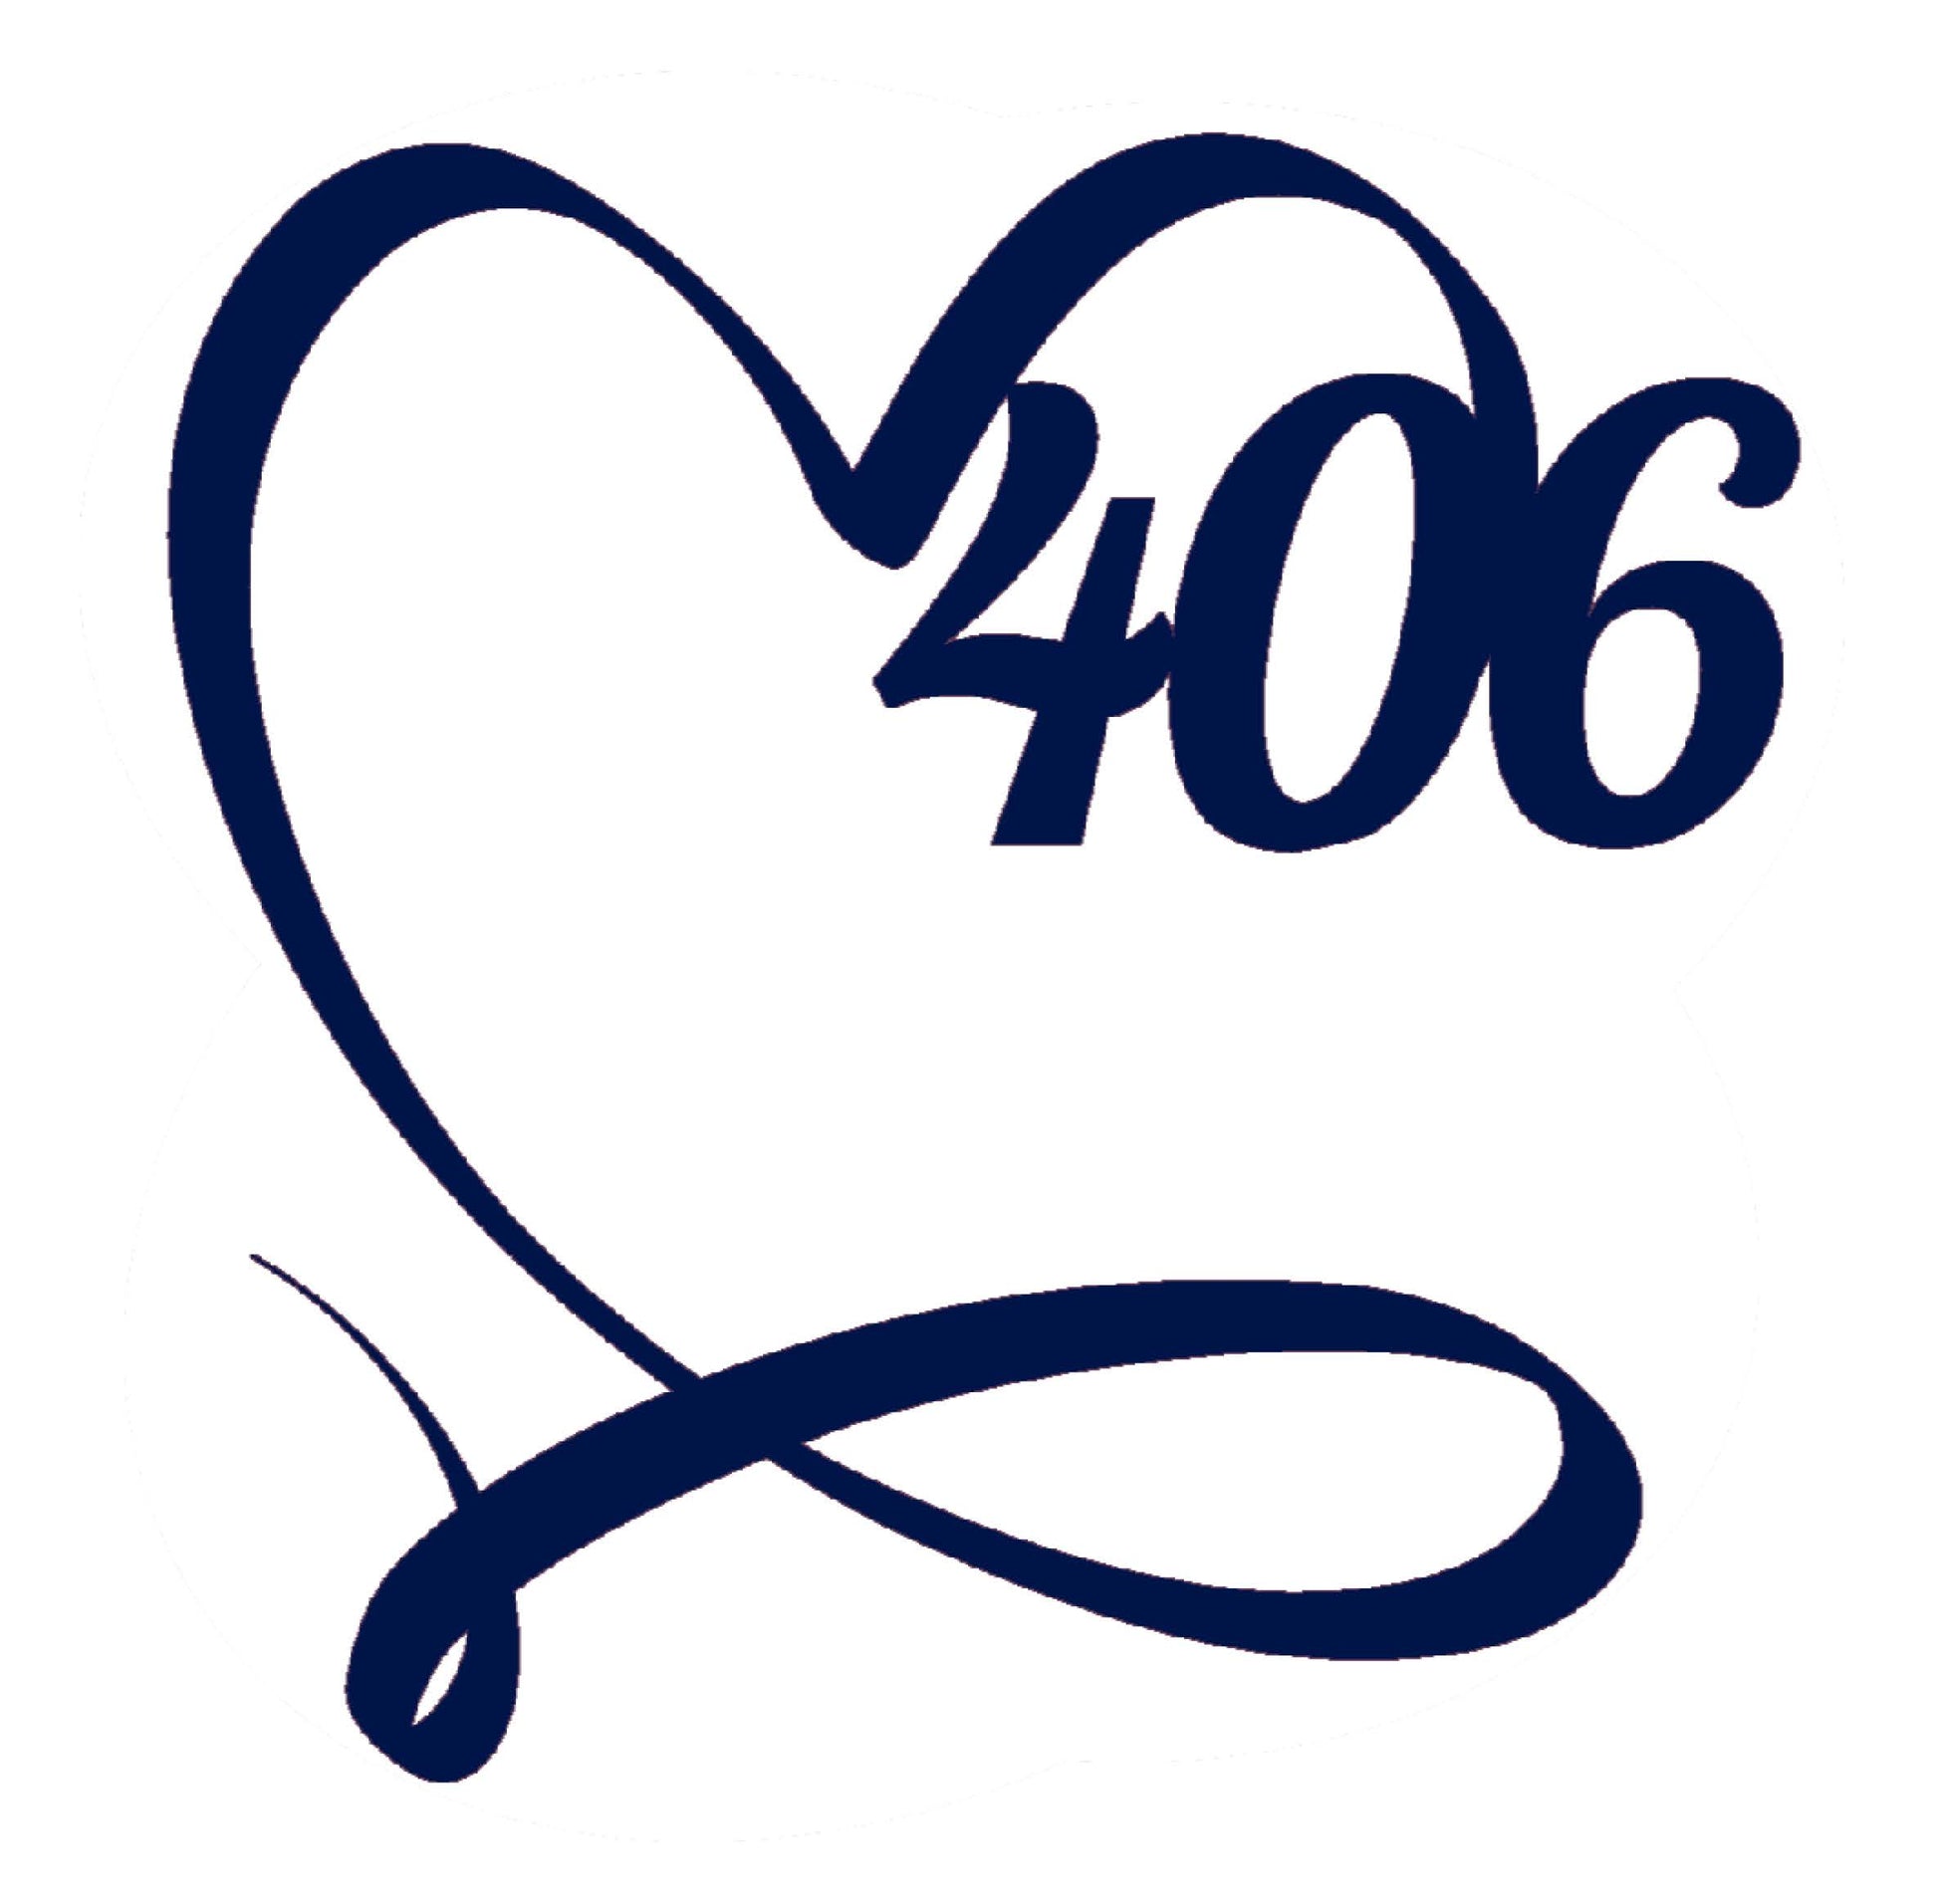 Image of the 406 Love Sticker, featuring the iconic '406 Love' design, ideal for adding a touch of Montana pride to your belongings.